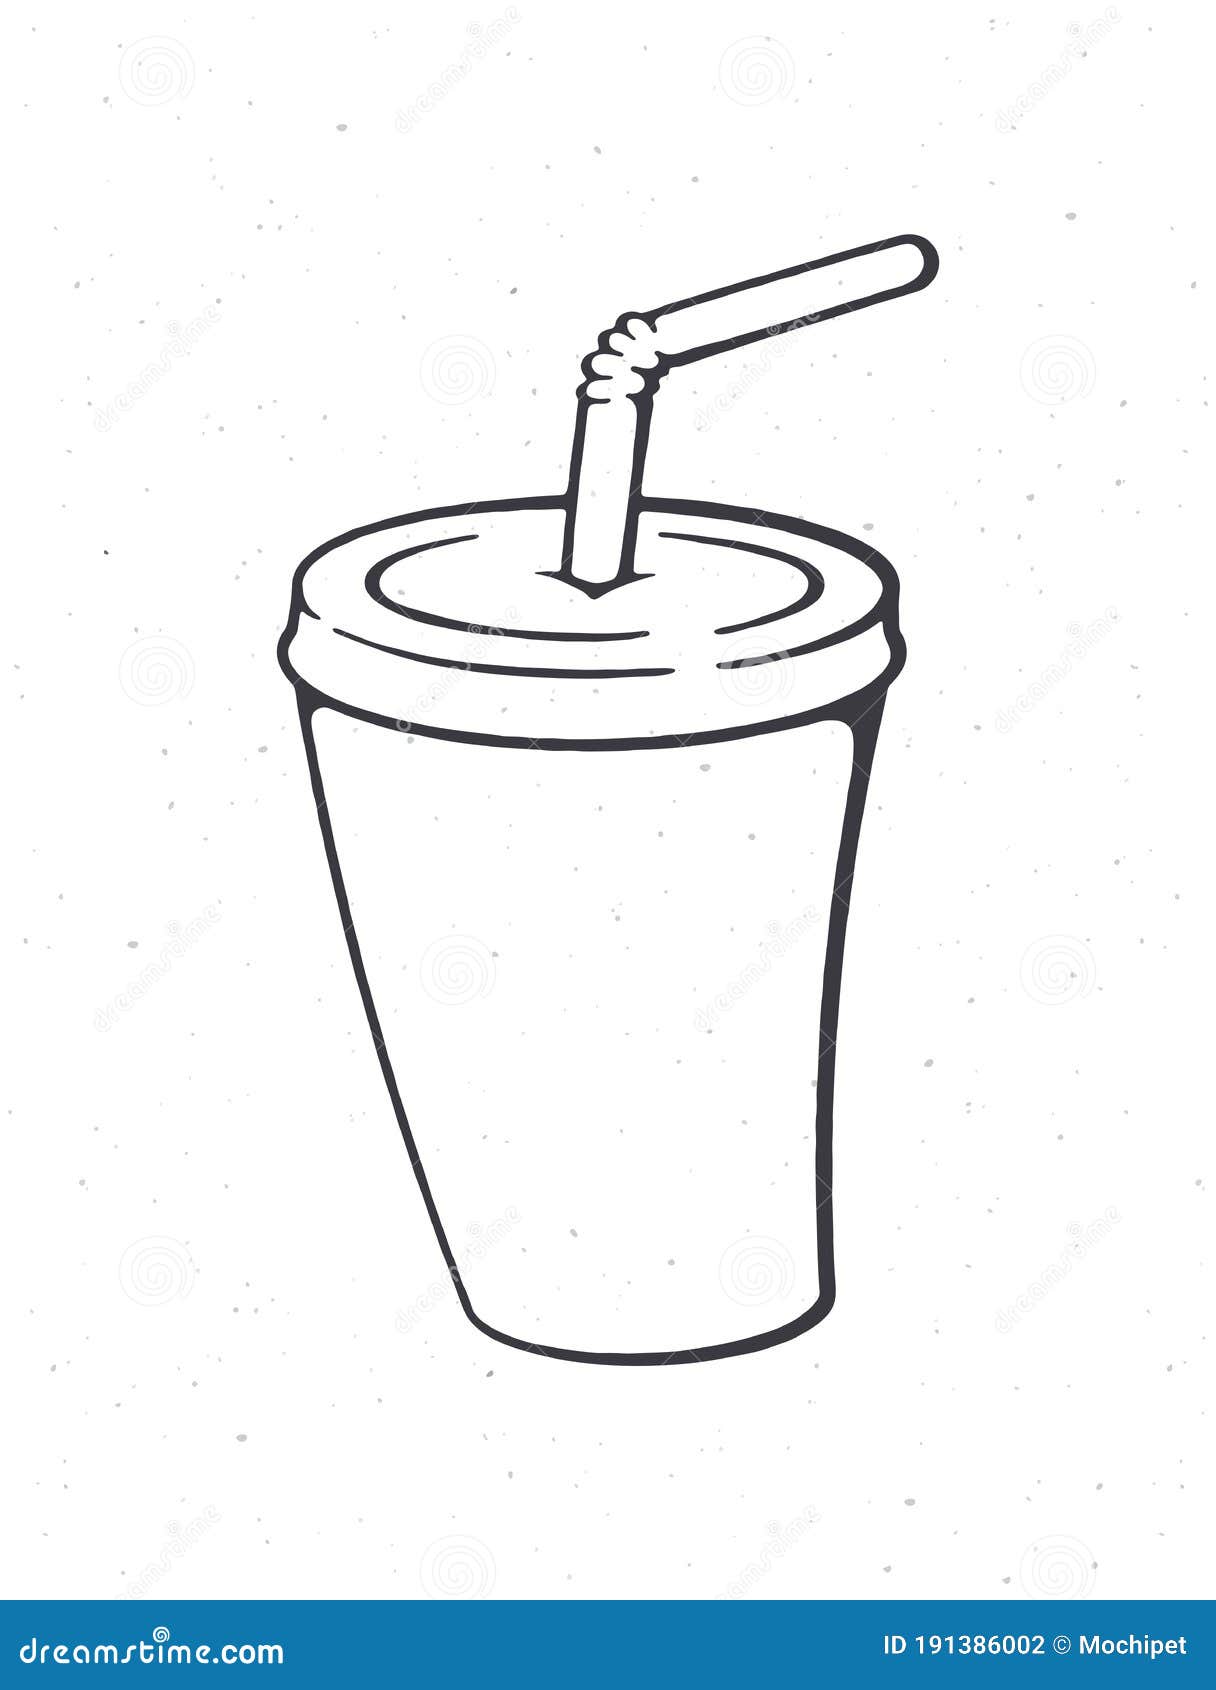 Premium Vector  A cup of coffee with a straw and a straw in it